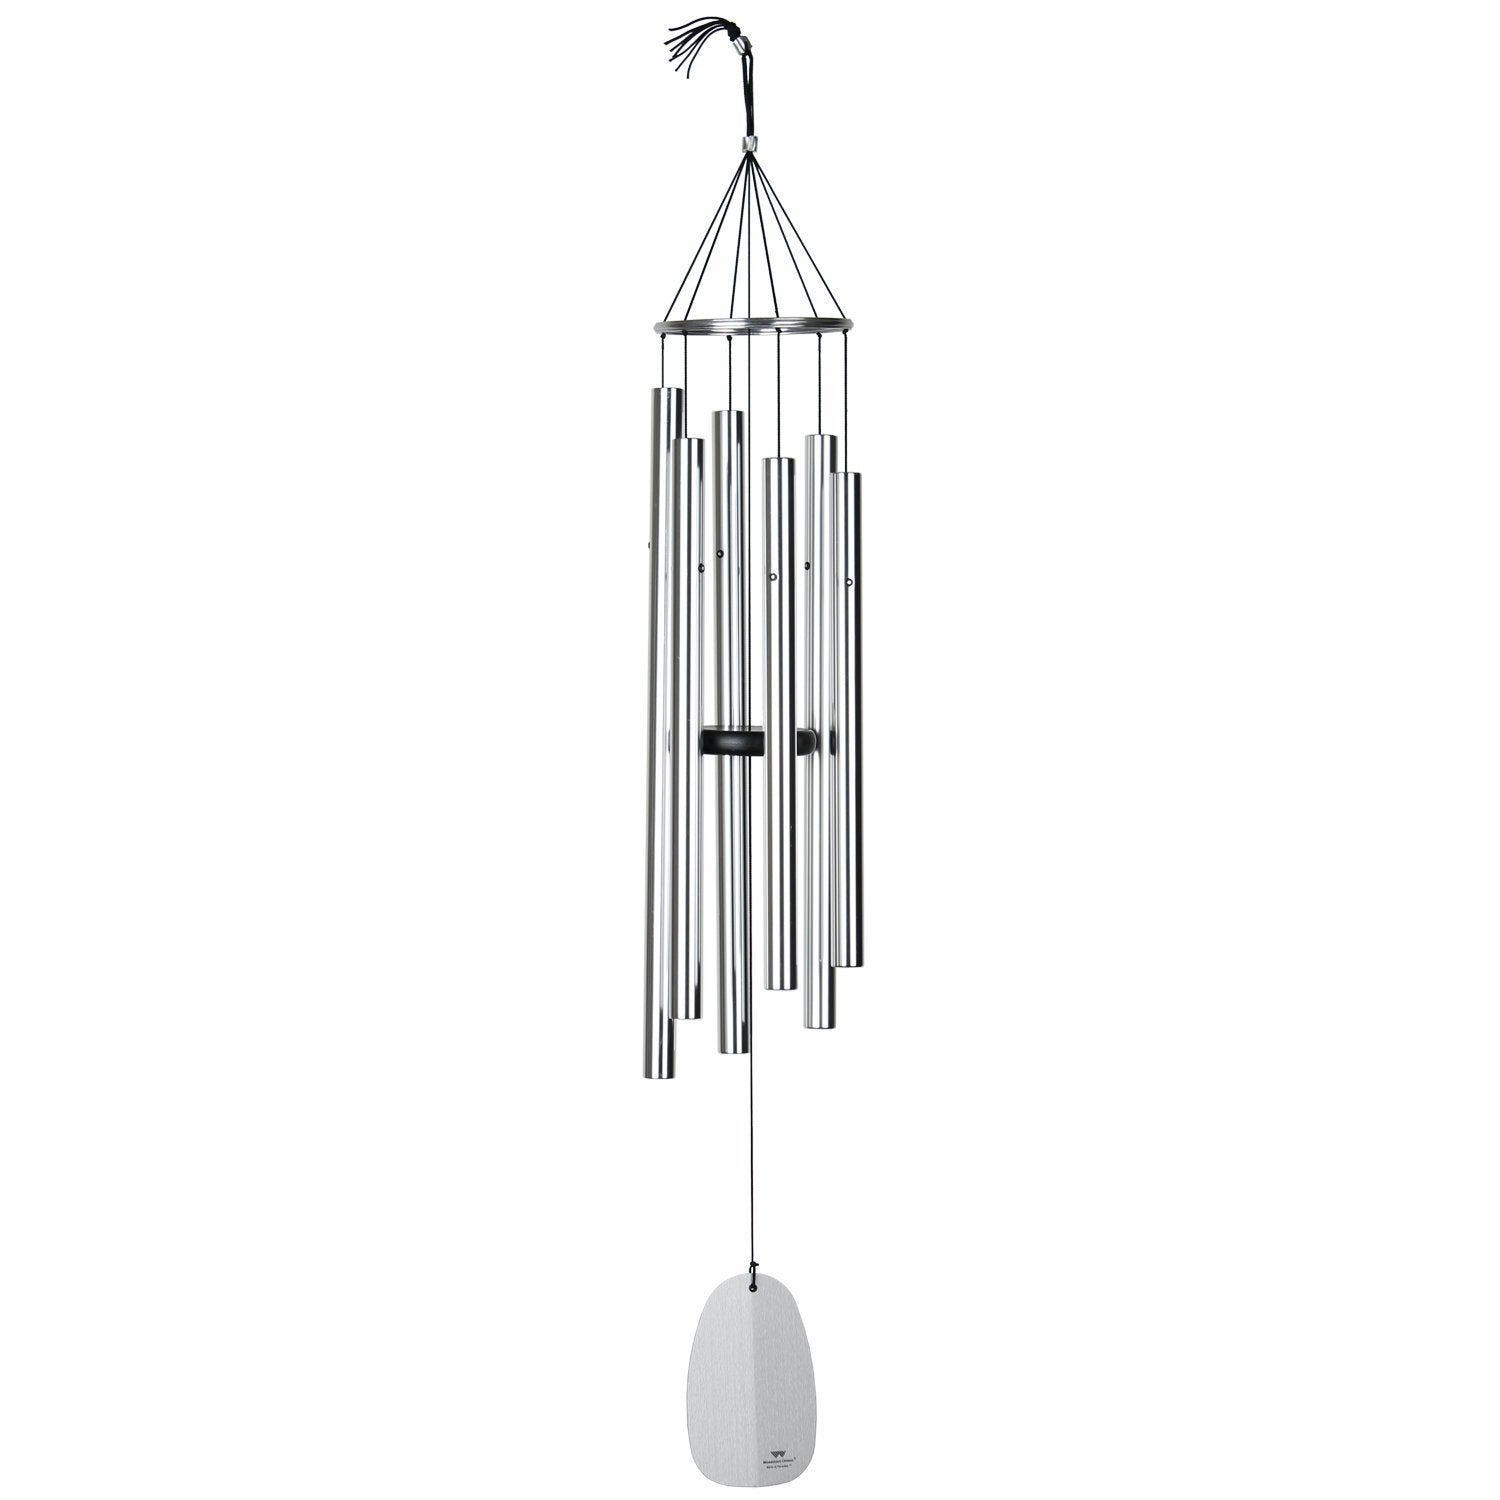 Bells of Paradise - Silver, 44-Inch full product image